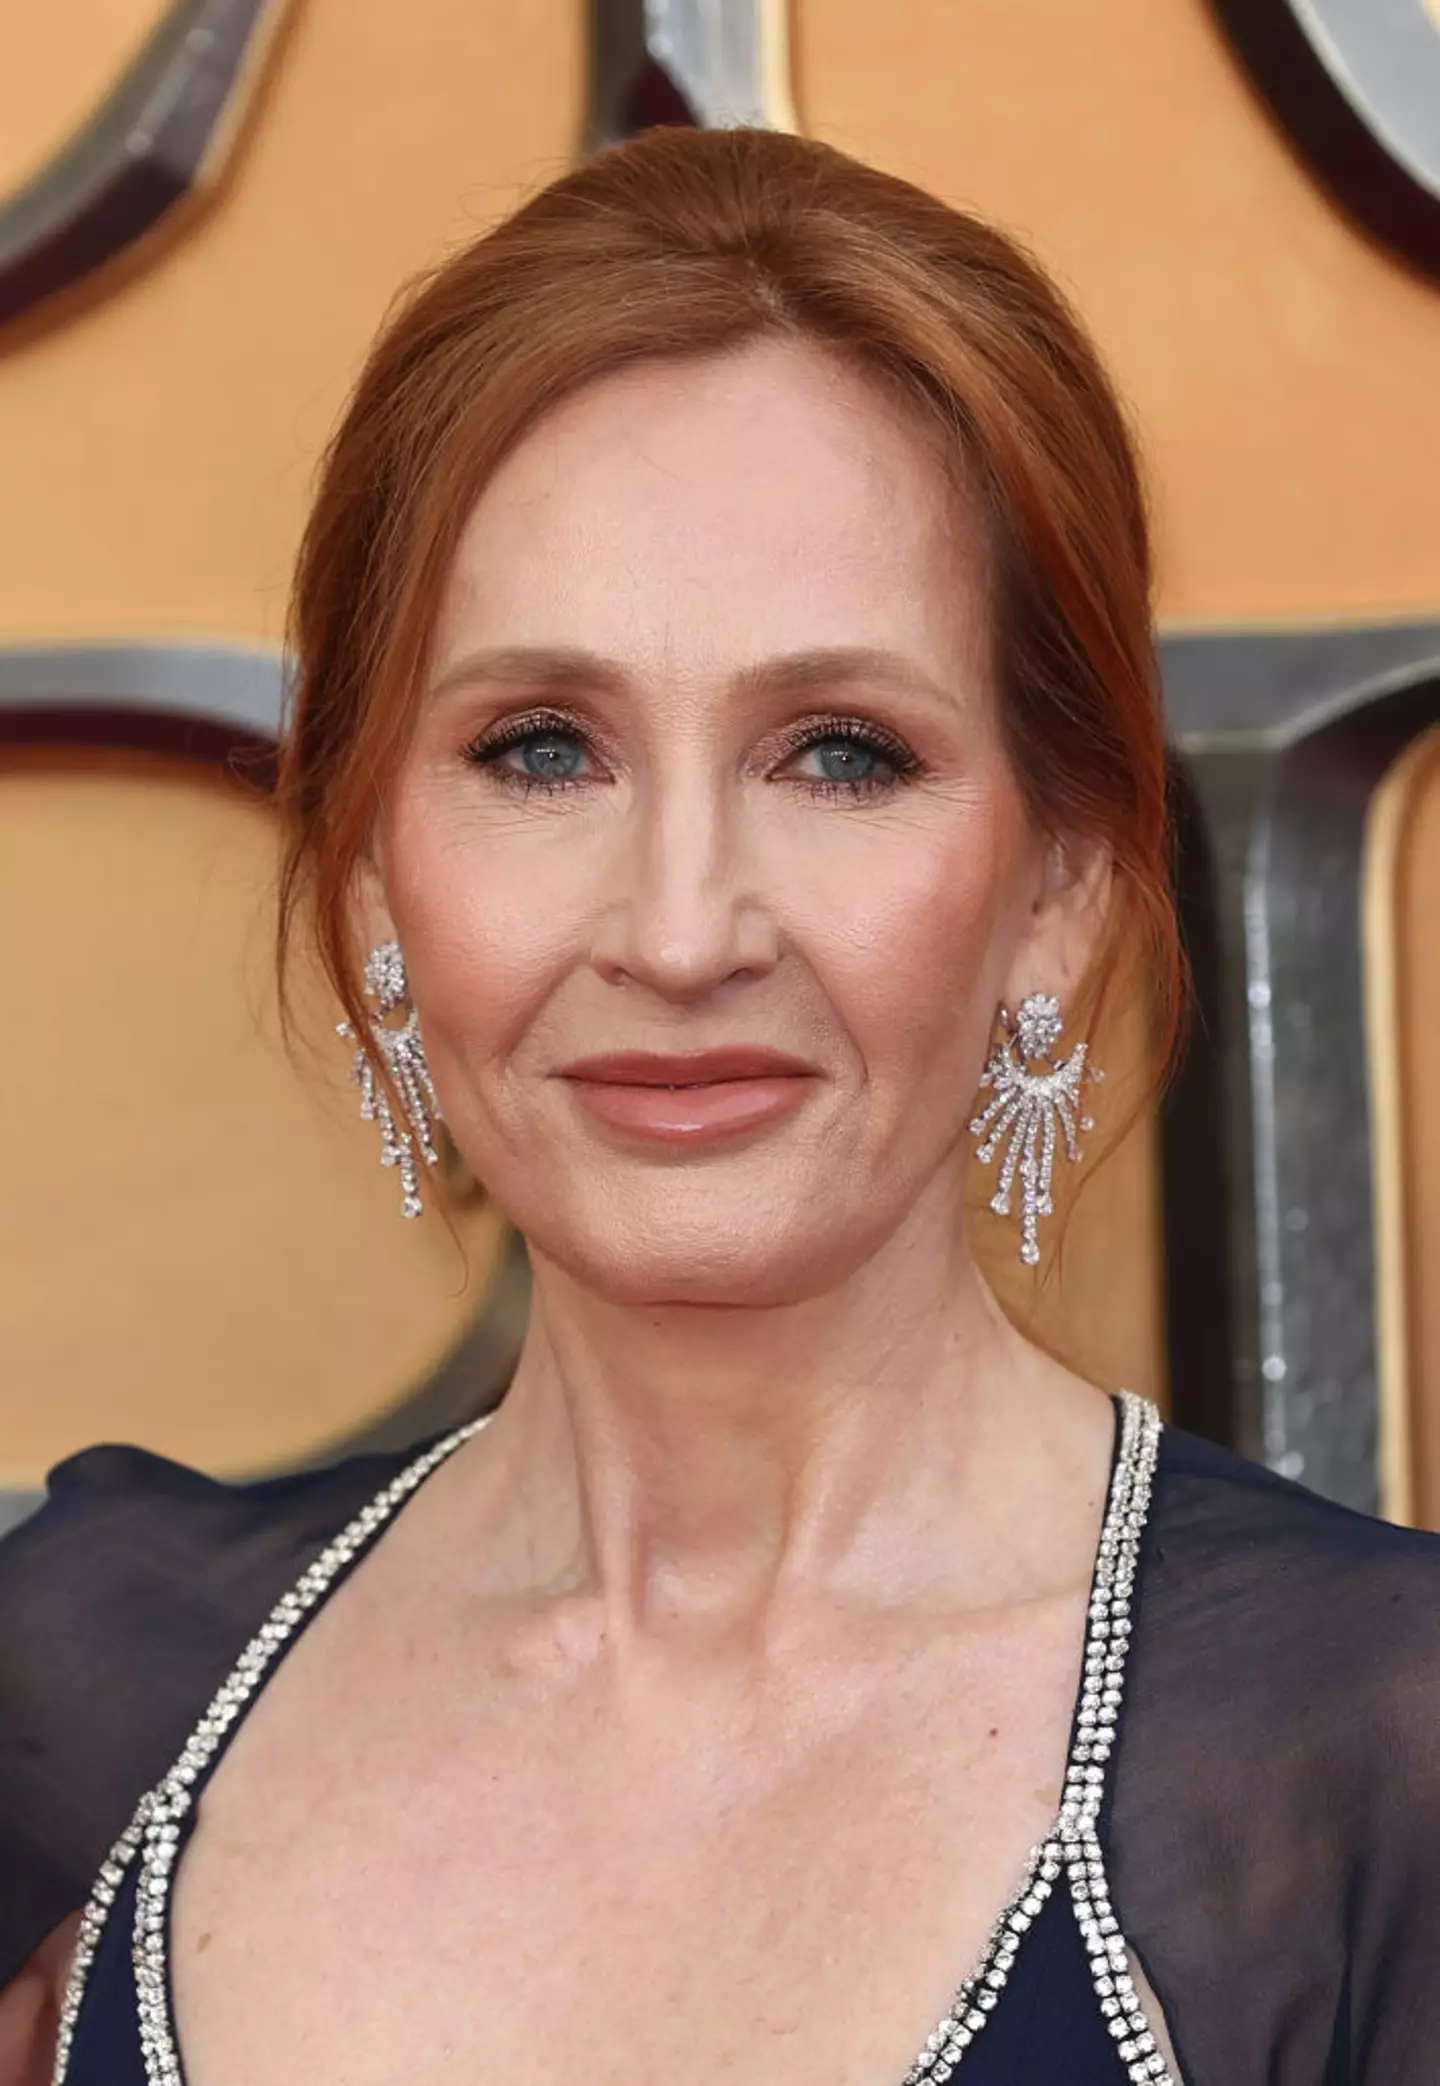 JK Rowling first made her views on transgender people public back in 2019. (Mike Marsland / Contributor / Getty Images)